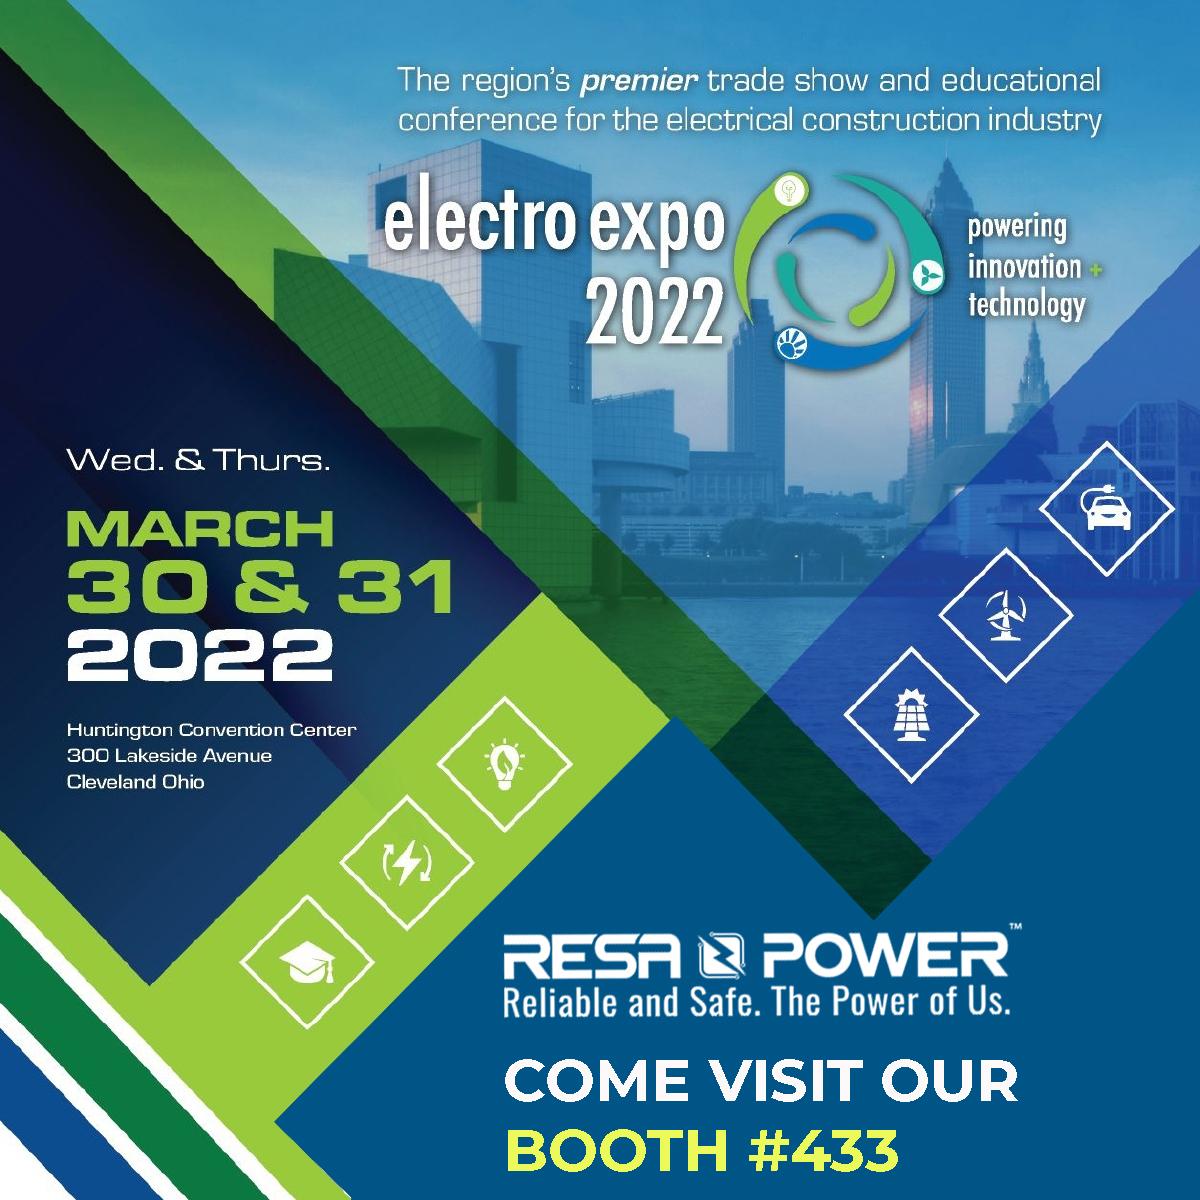 Join RESA Power at Electro Expo 2022